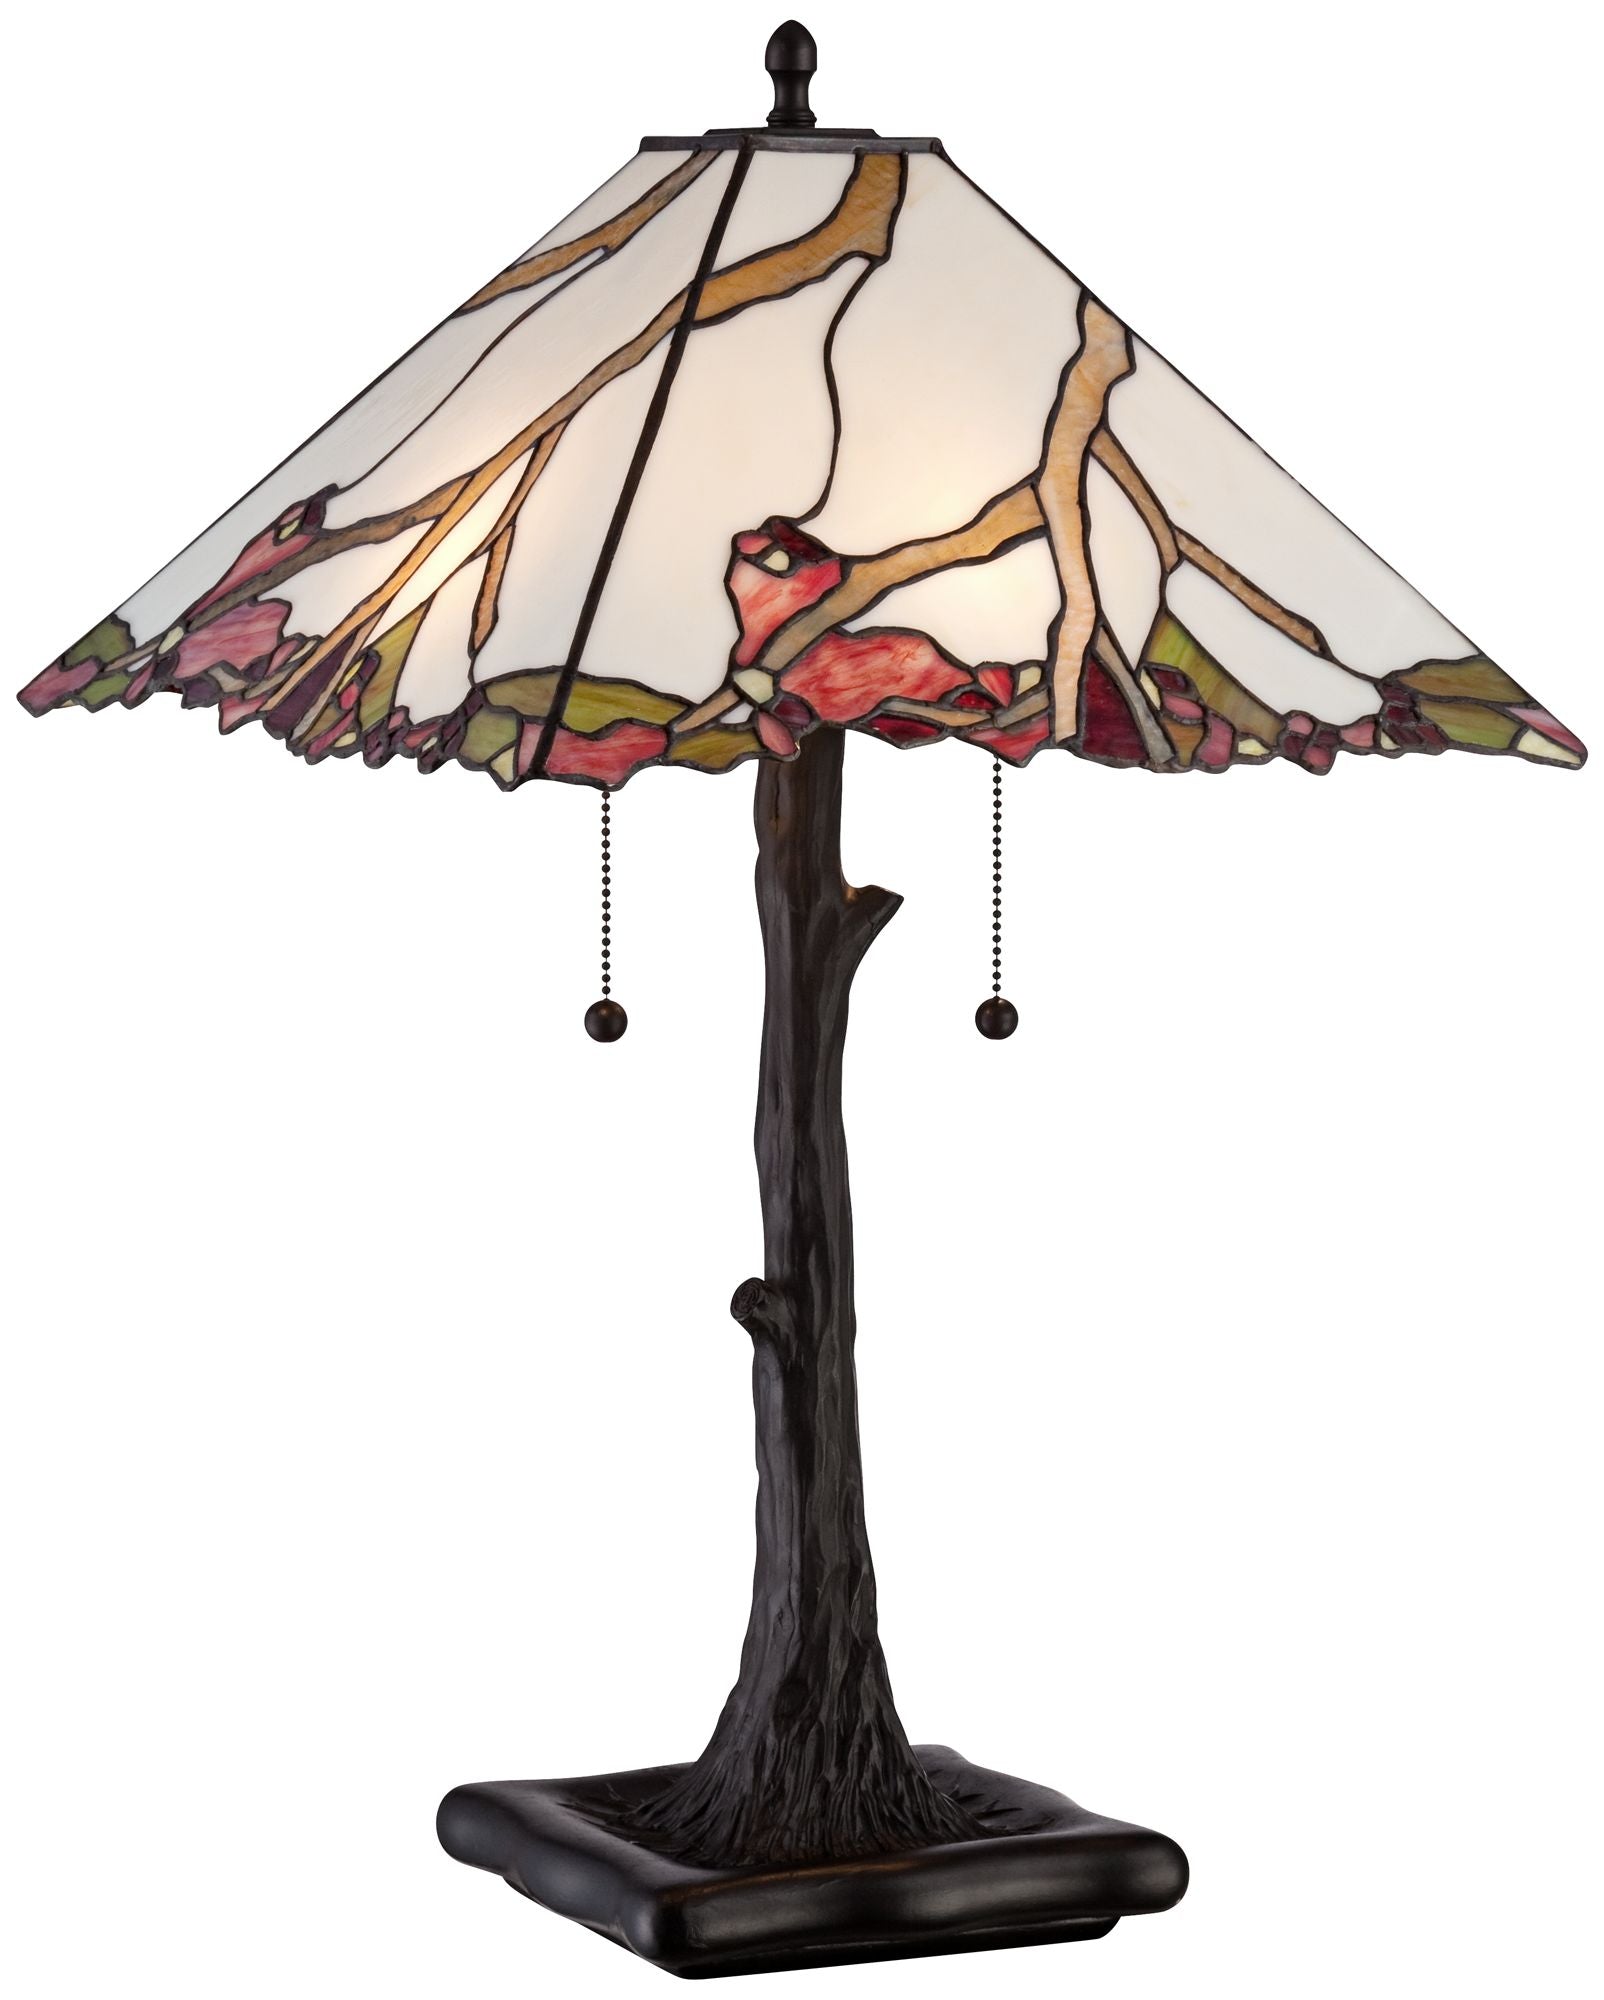 Robert Louis  Table Lamp 26" High Dark Bronze Cherry Blossom Stained Glass Shade for Living Room Family Bedroom Bedside Nightstand